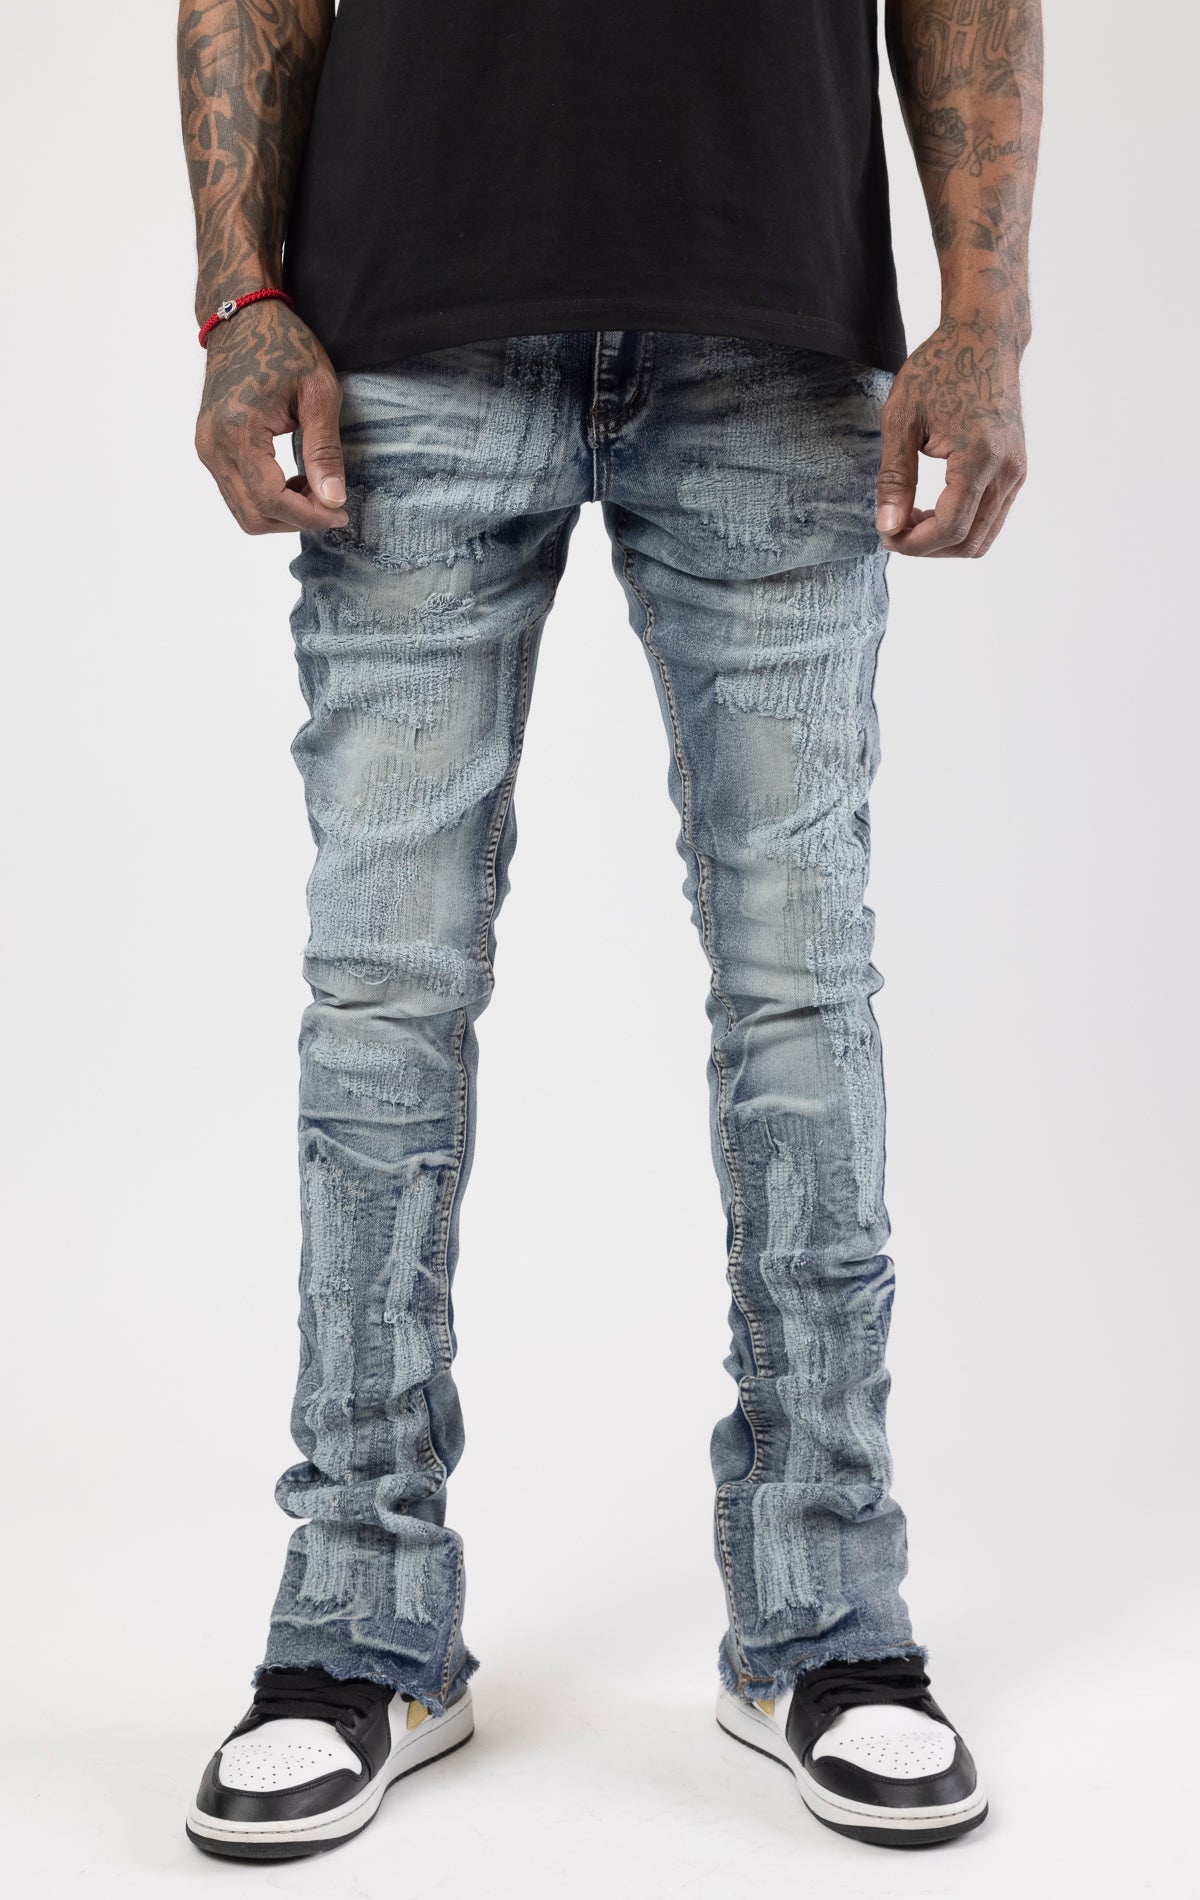 Distressed denim flared jeans with a stacked, skinny fit.